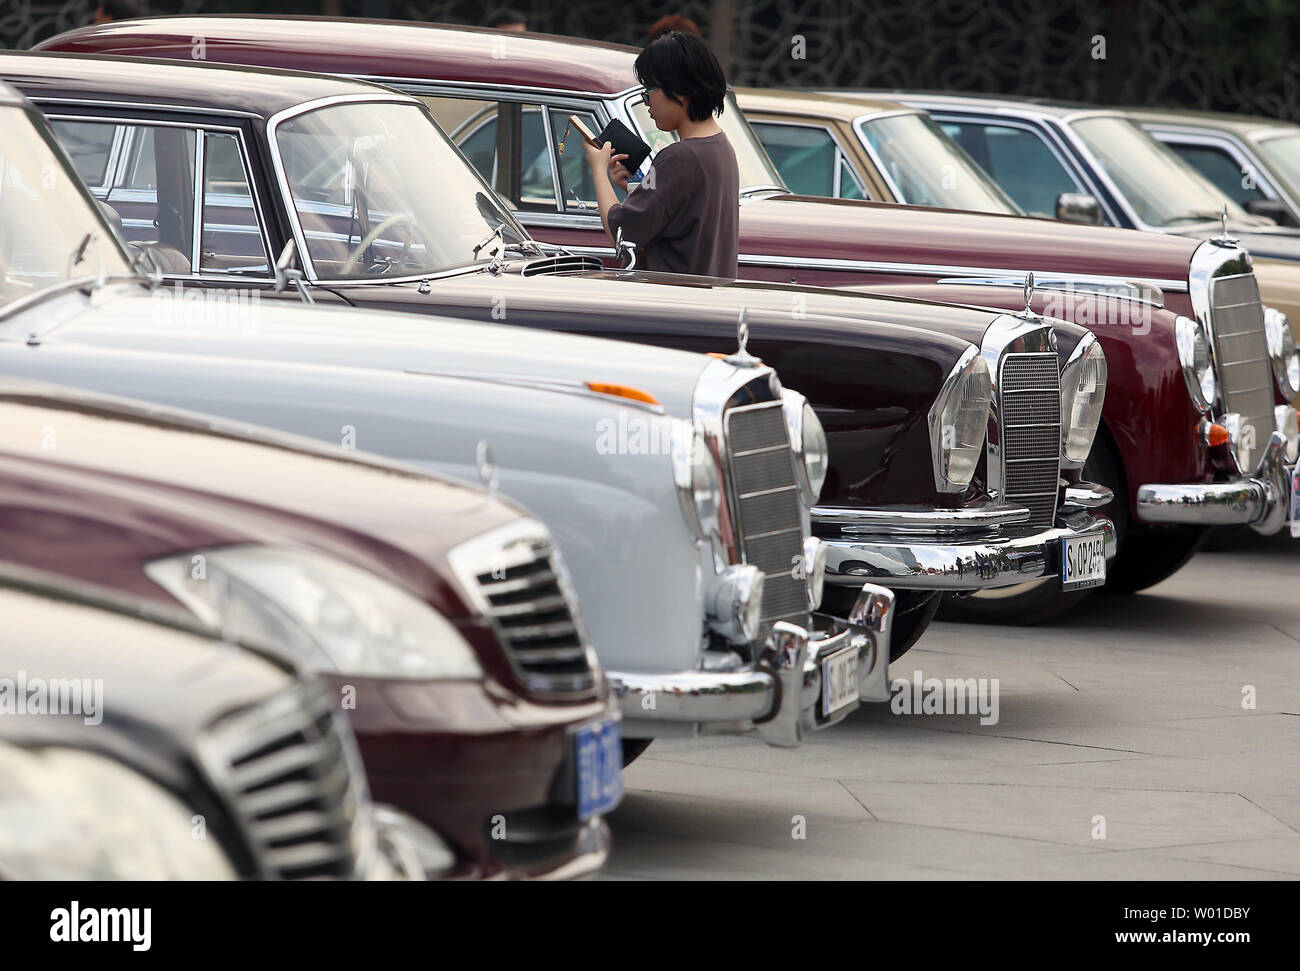 A Chinese woman takes photos of vintage Mercedes-Benz cars on display in the lead-up to a classic car rally in Beijing on September 18, 2017.    Mercedes-Benz was one of the first major luxury cars allowed to be imported in to China, and still retains a major share of the luxury automobile market.  China has emerged as one of the world's top importers of luxury cars, and is the world's largest automobile market.   Photo by Stephen Shaver/UPI Stock Photo